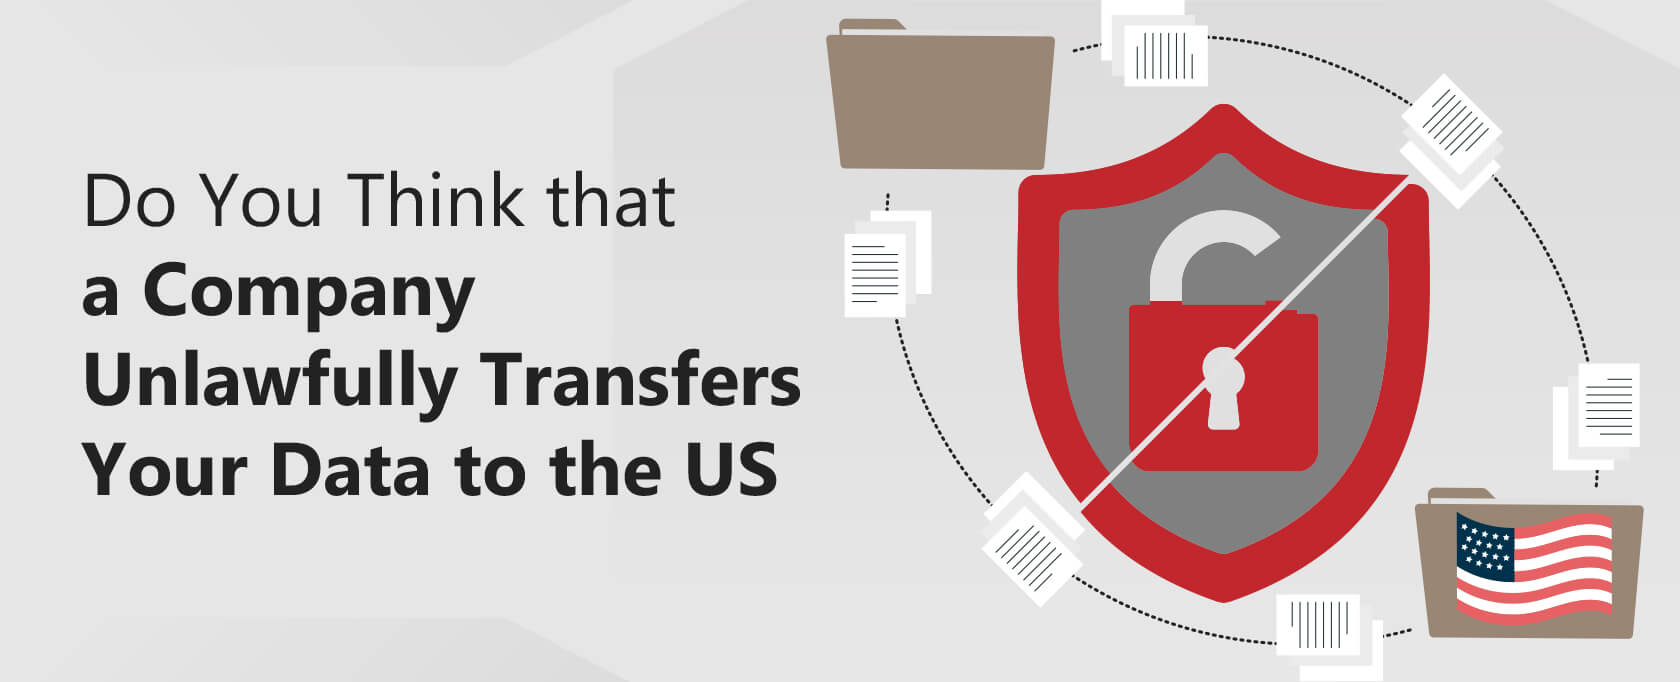 Do You Think that a Company Unlawfully Transfers Your Data to the US?